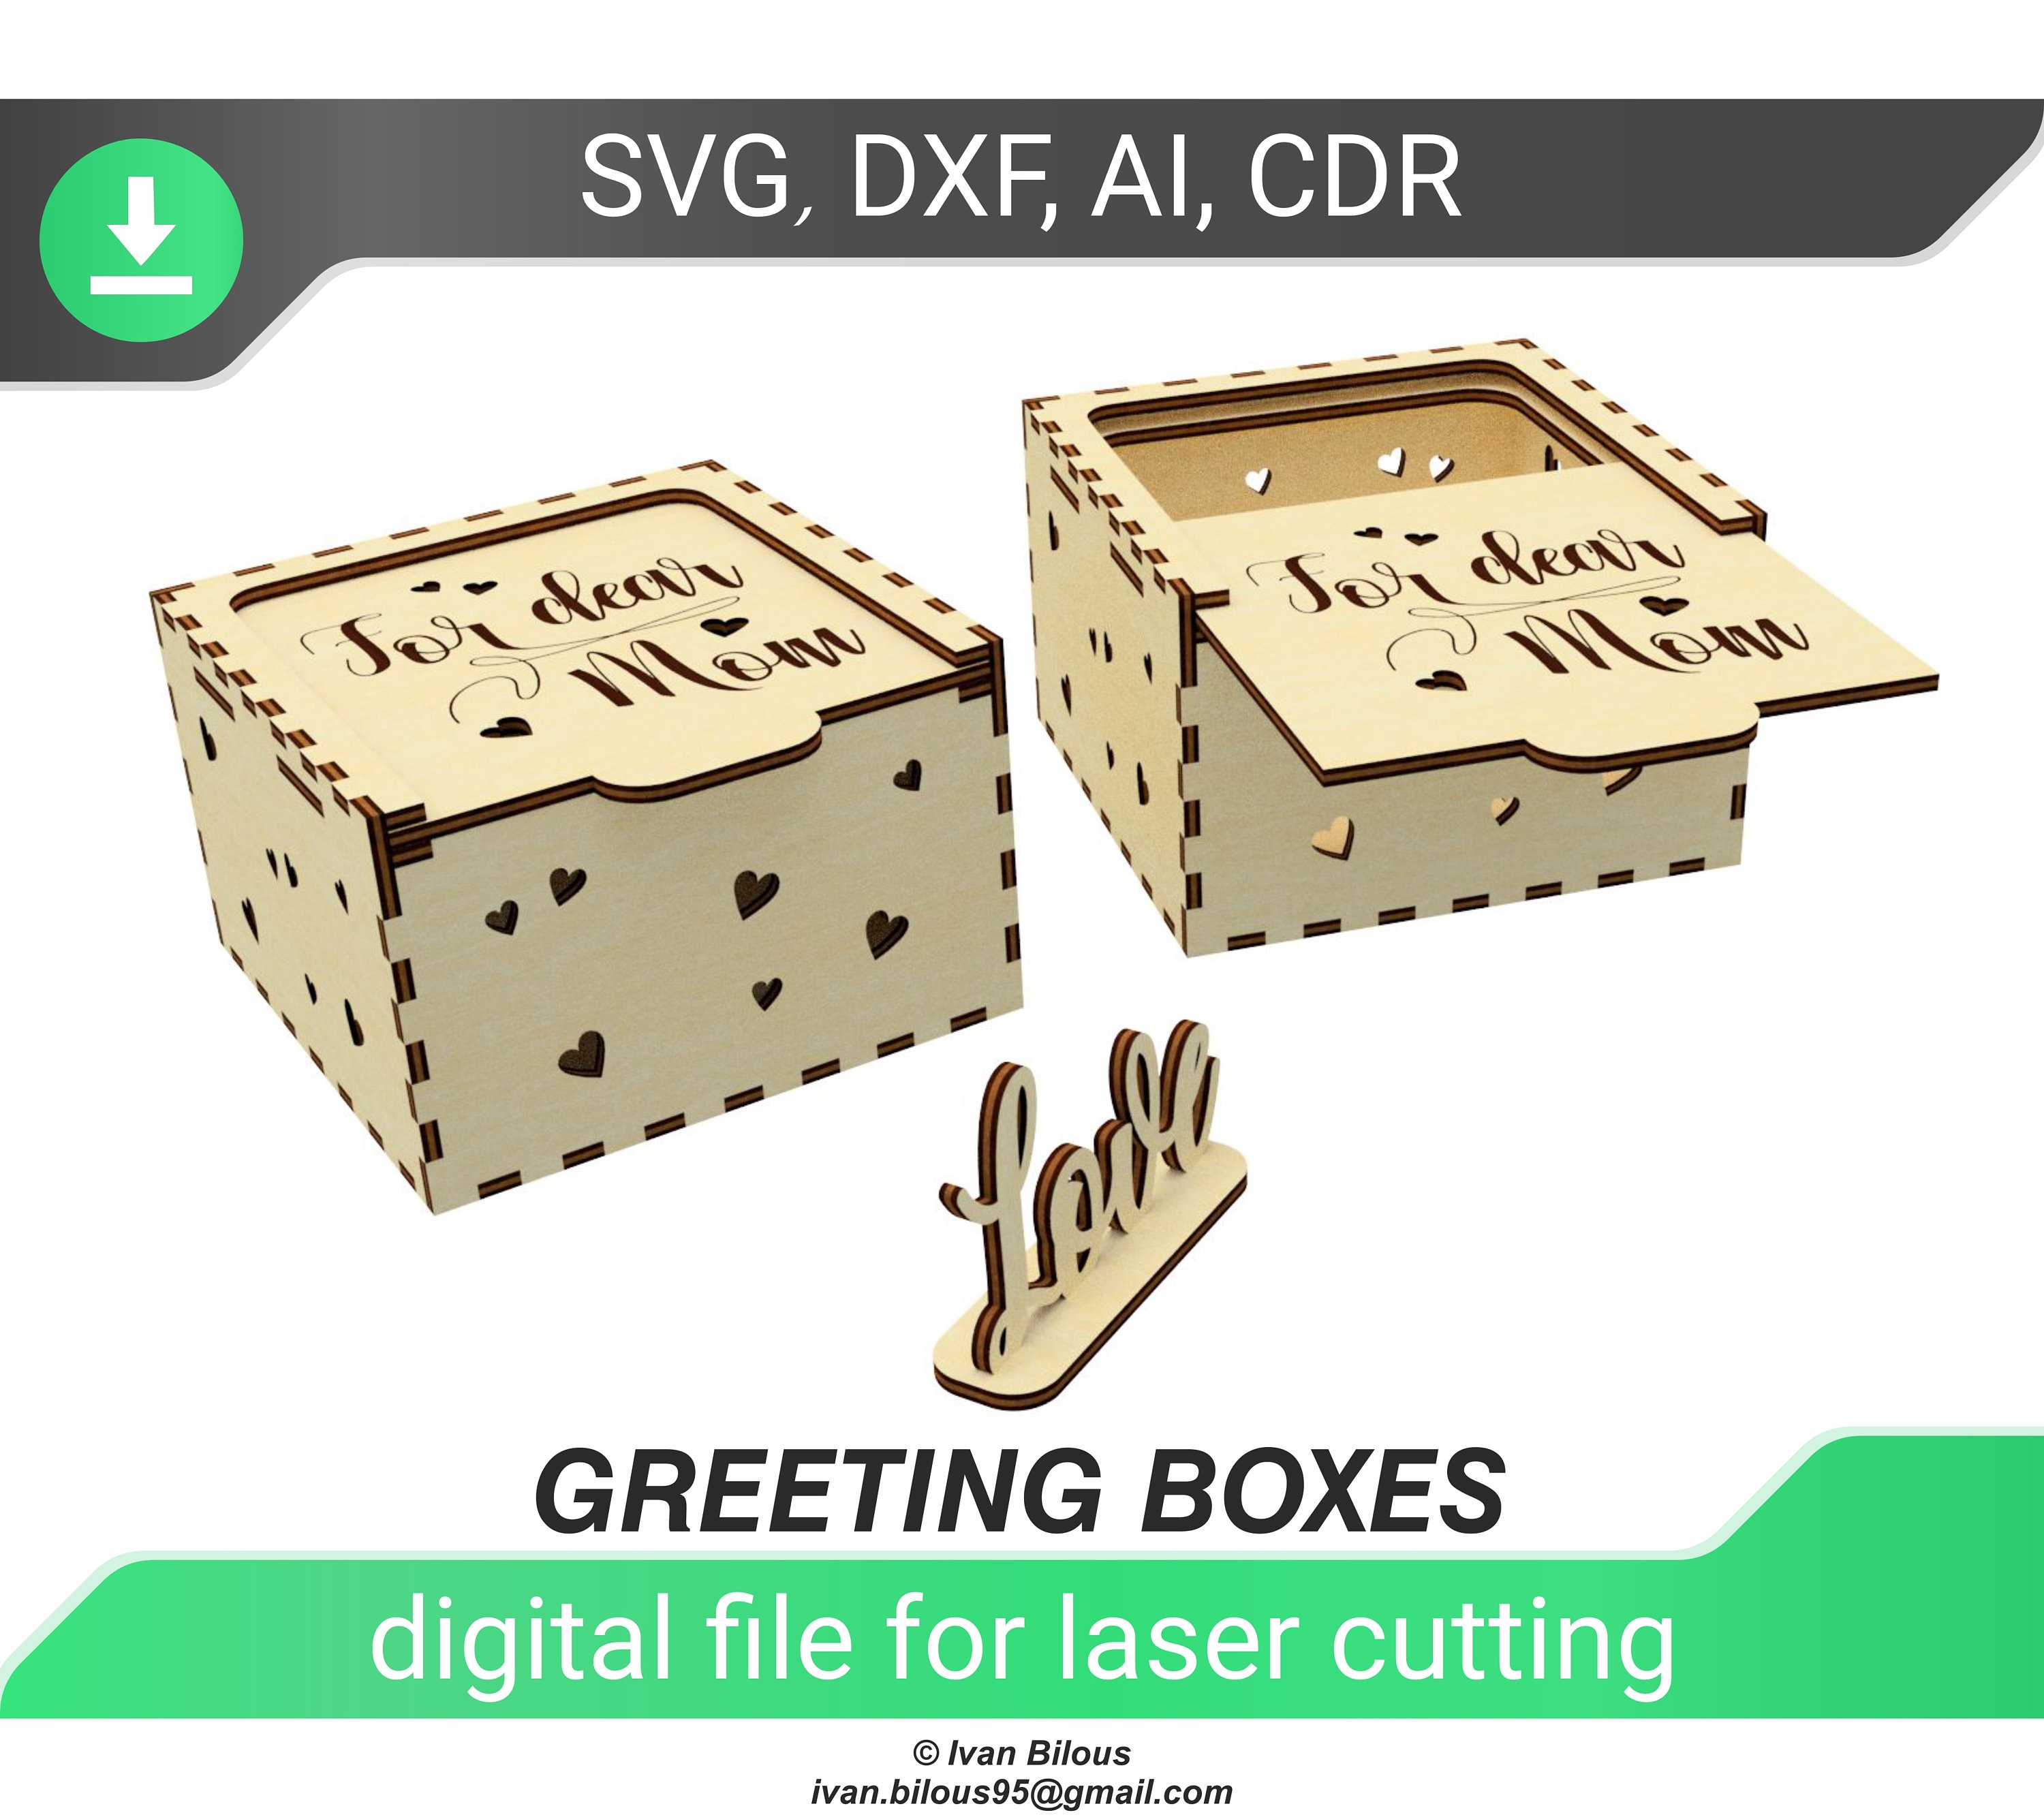 Engraved Small Box With Lid and Lock.laser Cut Files SVG, DXF, CDR, Vector  Plans Glowforge Files Instant Download, Cnc File. 765 